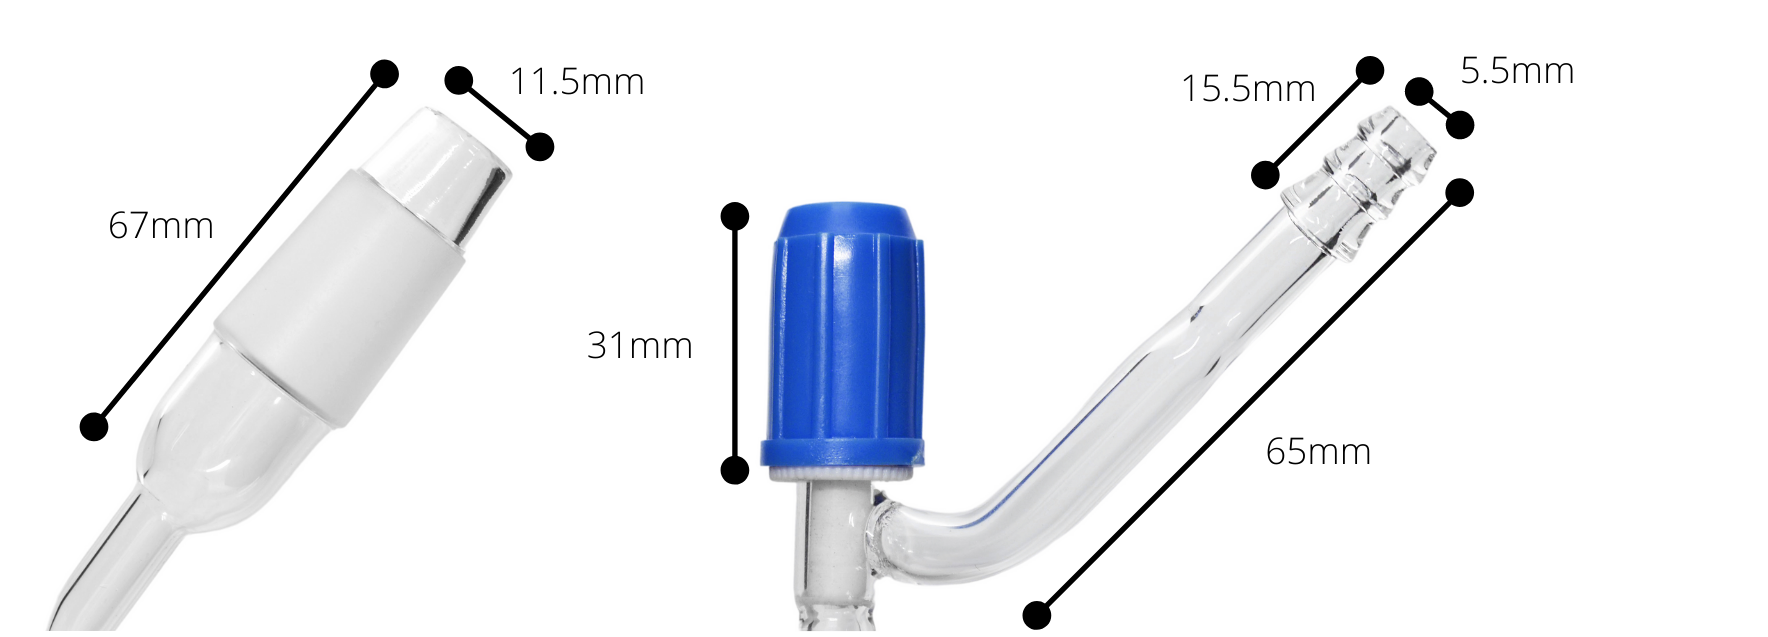 Stopcock Adapter - Rotaflow Key, 24/29 Cone Size - Straight Connection with Cone for Flexible Tubing - Borosilicate 3.3 Glass - Eisco Labs